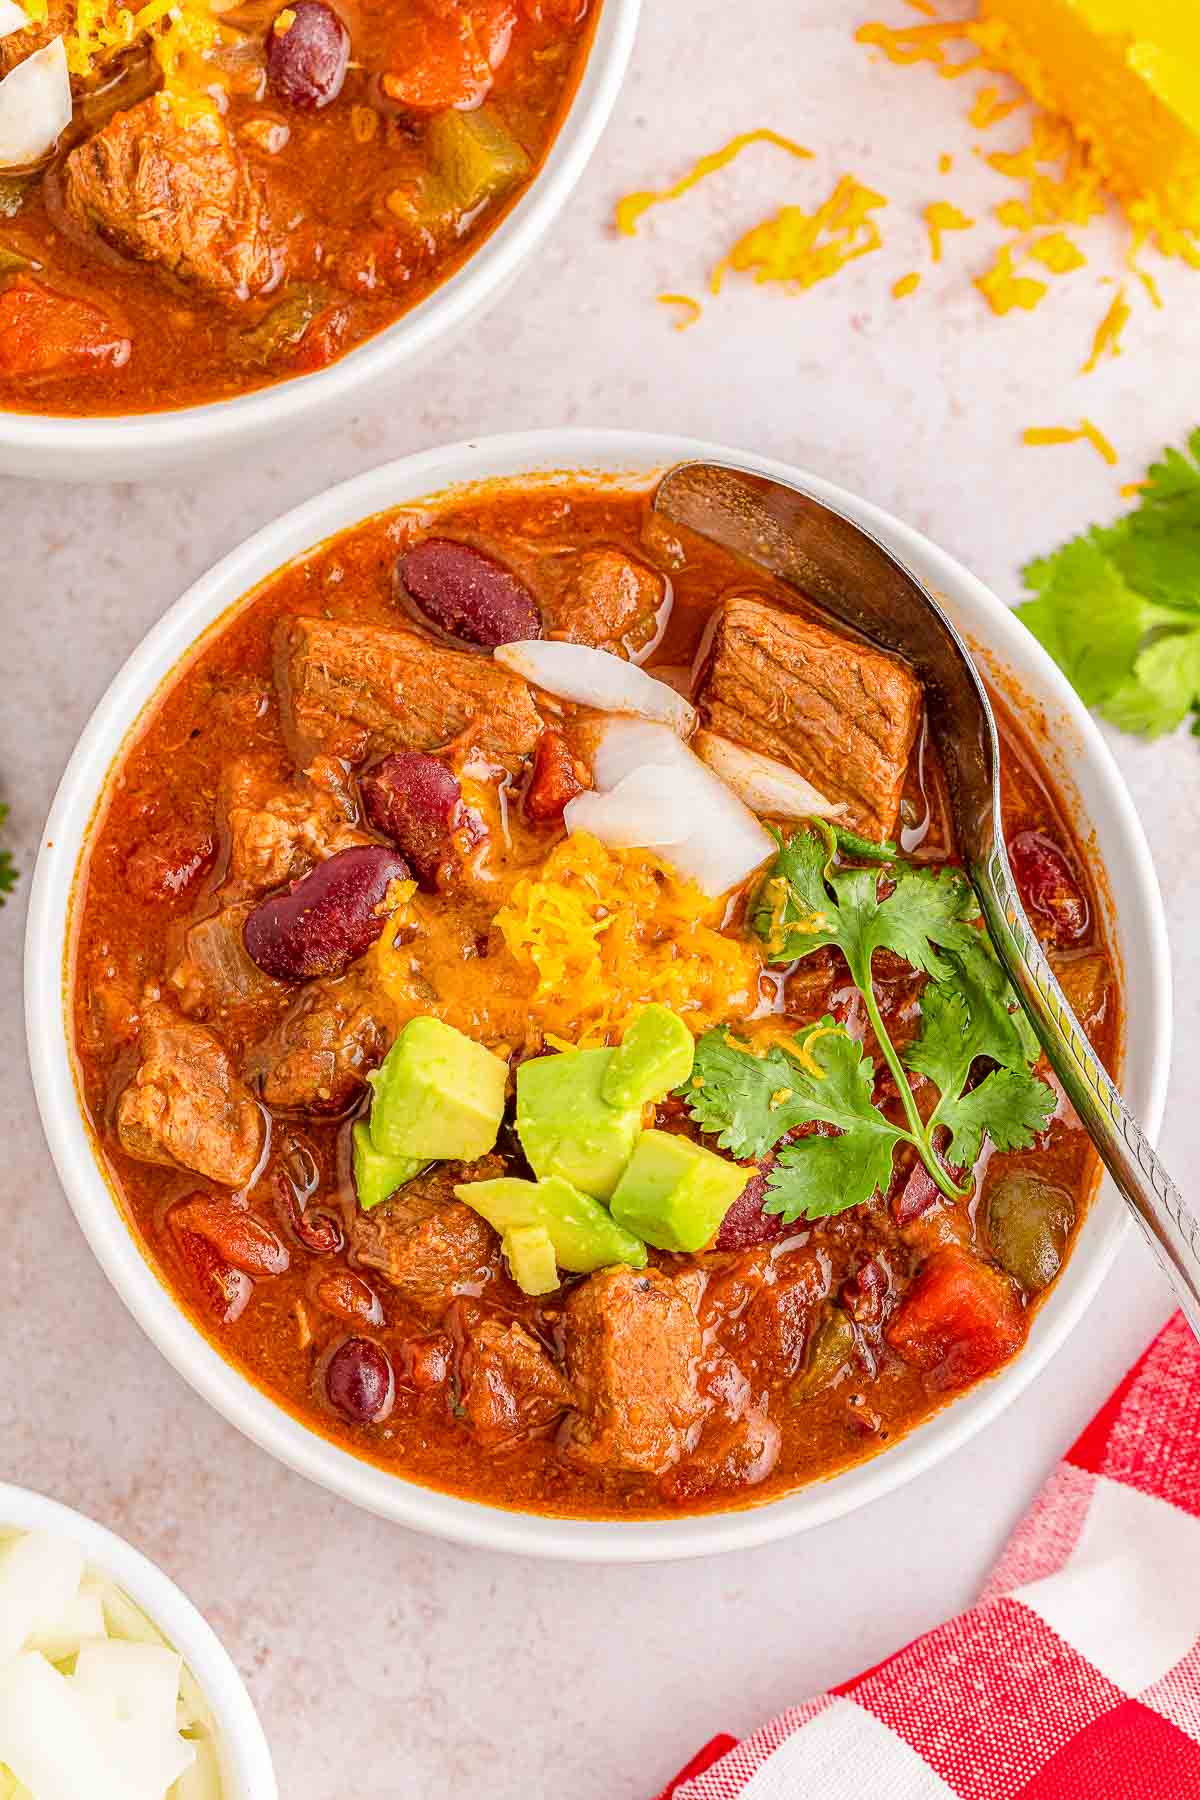 Two bowls of chili with beef and guacamole.